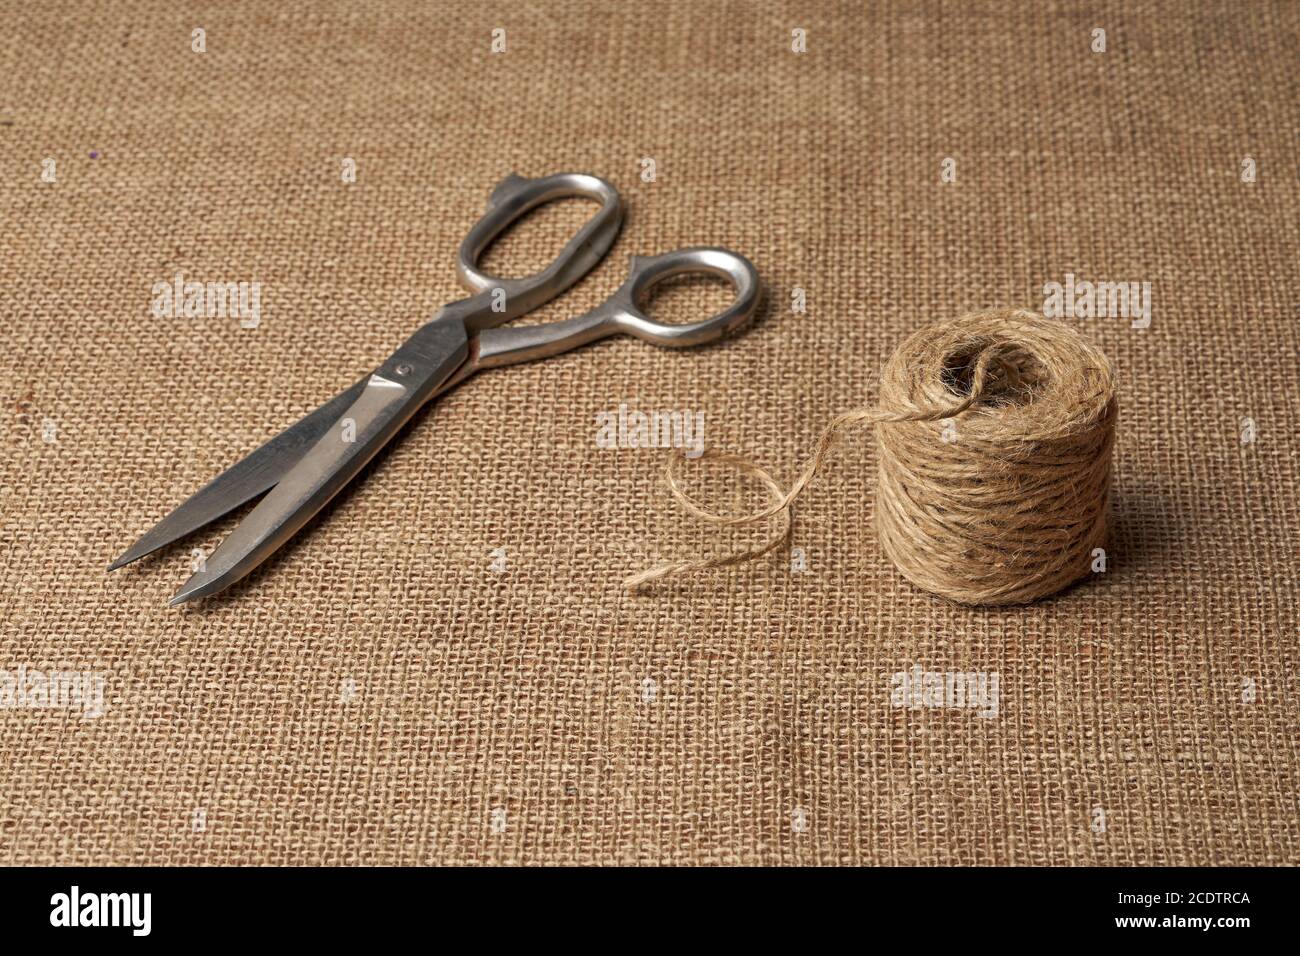 Ball of Brown String and Scissors on White Background Stock Photo - Alamy